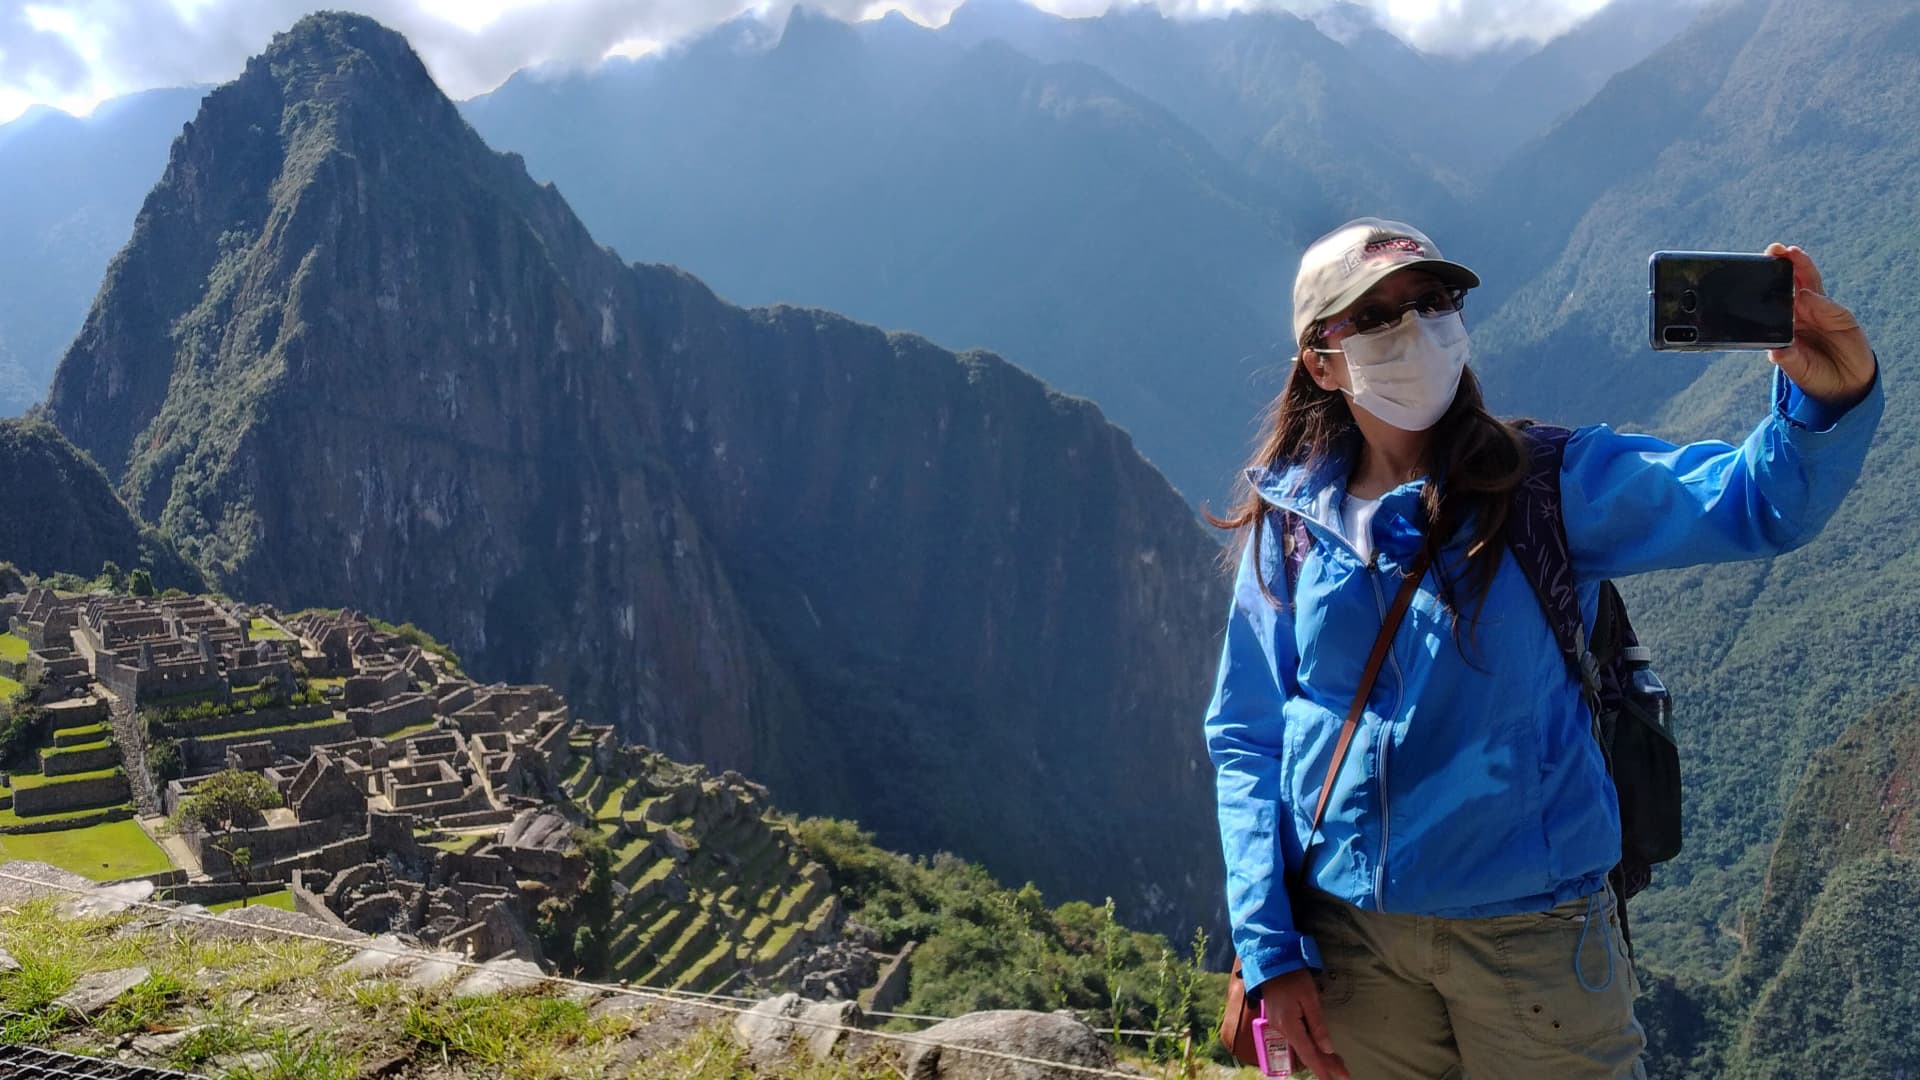 Visitors to Machu Picchu must wear masks at all times, even while taking photos.